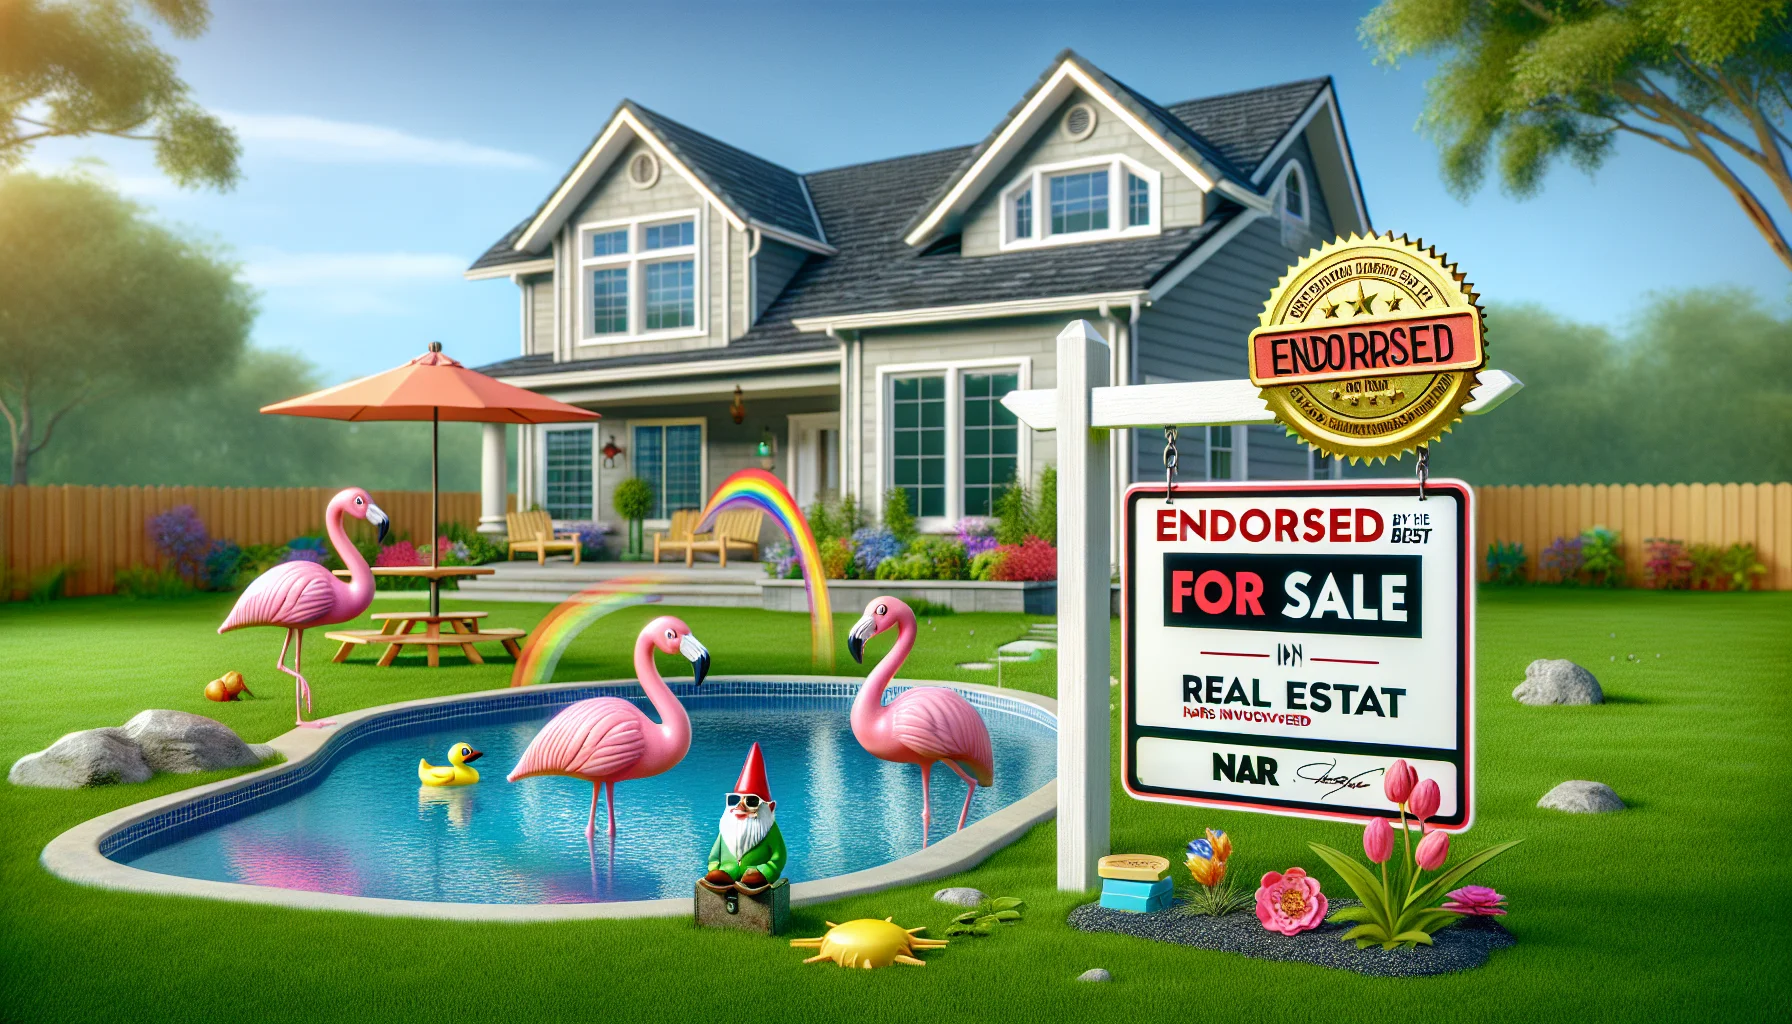 Create a humorous and realistic image of a perfect scenario related to real estate. Visualize a beautifully designed, top of the line house with a lush green lawn and a 'For Sale' sign prominently displayed. Throw in a few quirky elements to make it funny - perhaps a few flamingos wearing sunglasses on the lawn, a rainbow in the bright blue sky, and a comical gnome fishing in a small ornamental pond. To indicate the excellence of NAR's involvement, add a gold seal in the corner saying 'Endorsed by the Best'. Remember to keep it colorful and vivid.